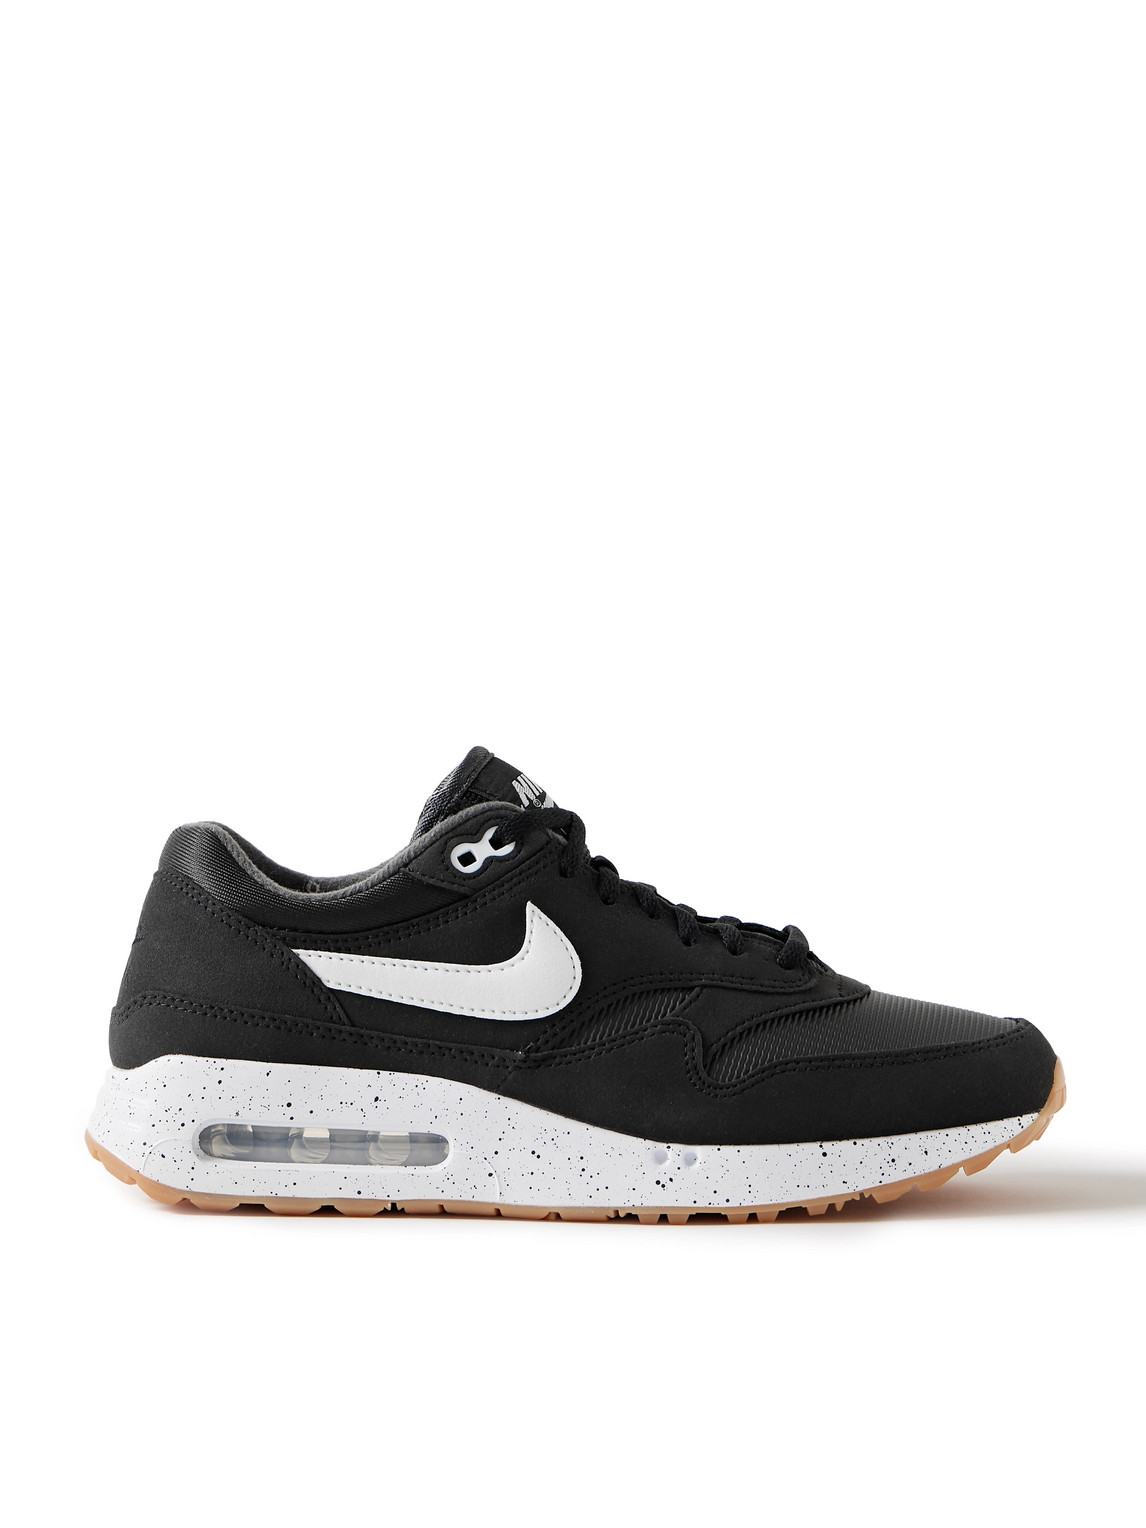 Air Max 1 ’86 OG G Suede, Leather and Mesh Golf Sneakers